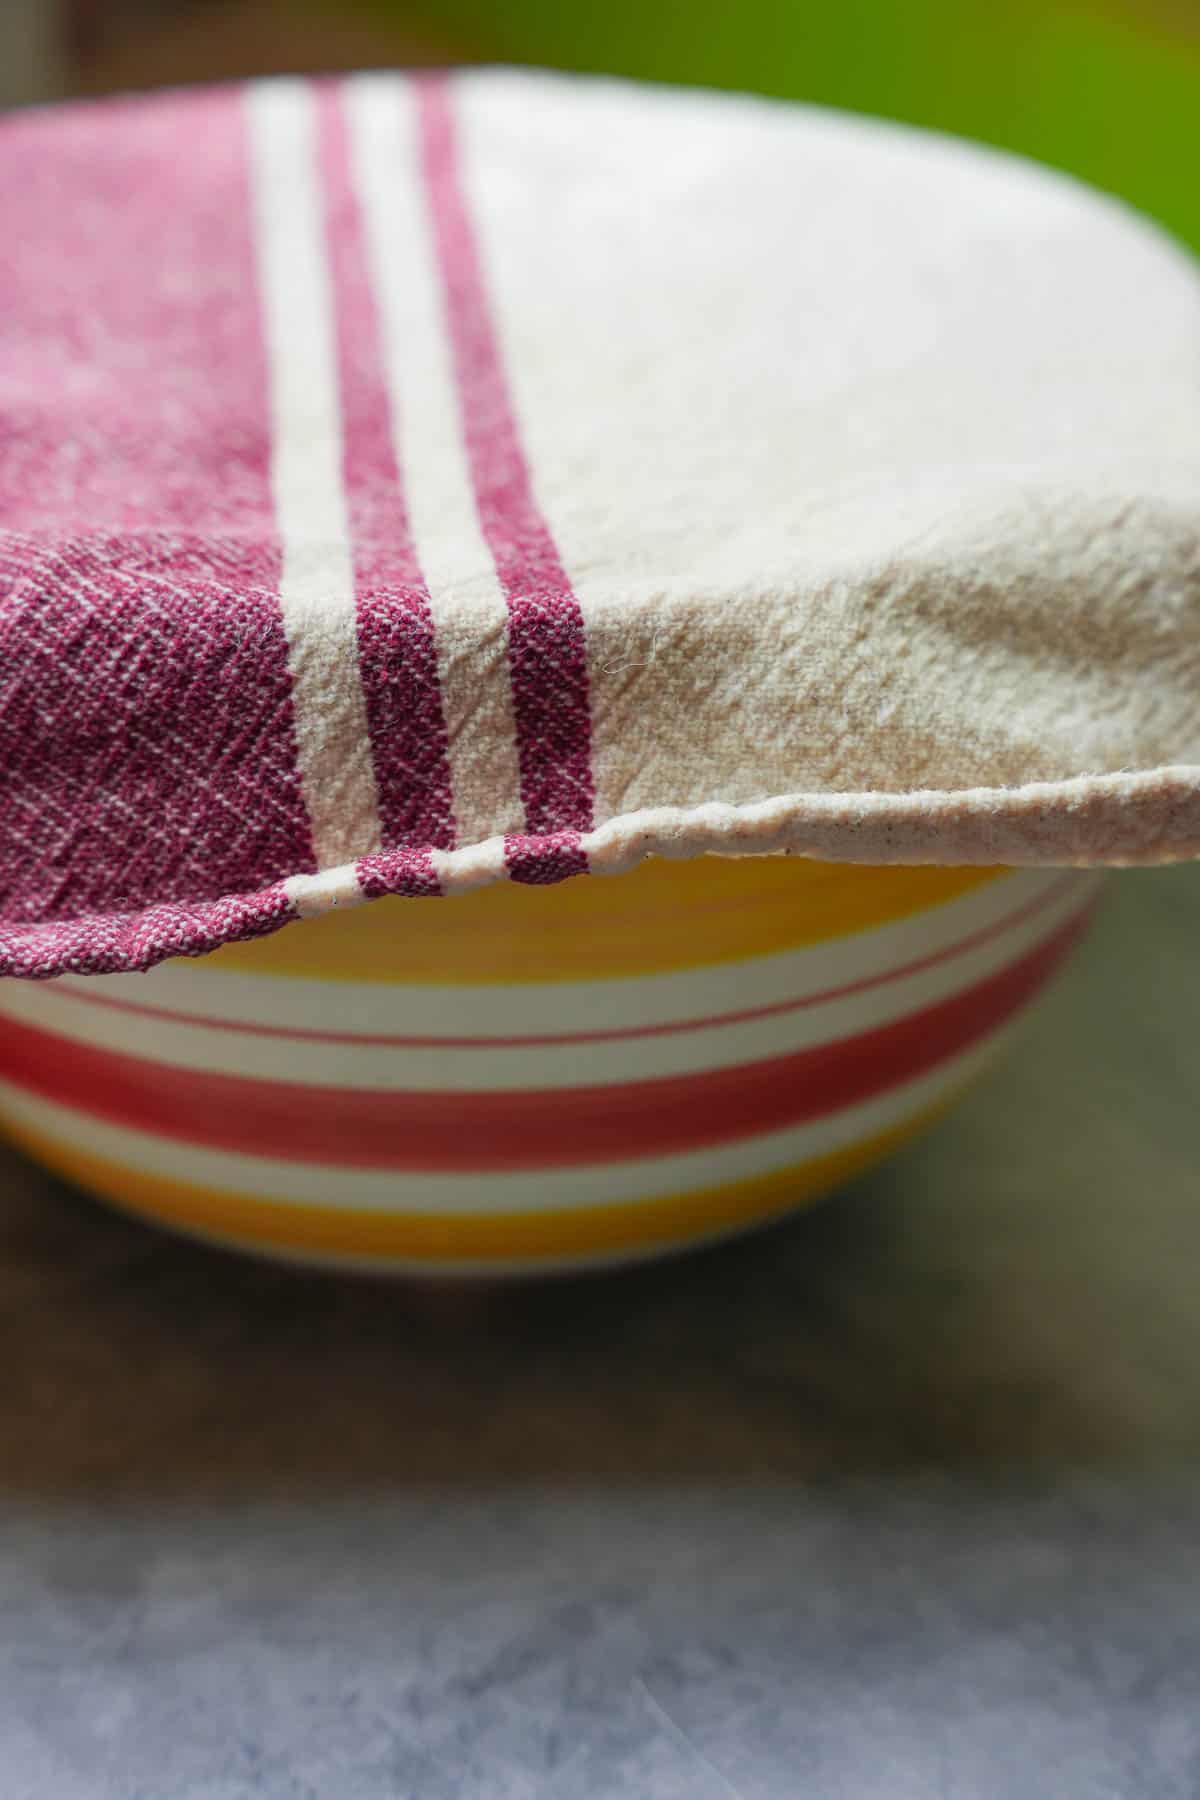 The mixed dough in a ceramic bowl is covered with a clean kitchen towel to rest and double in size.